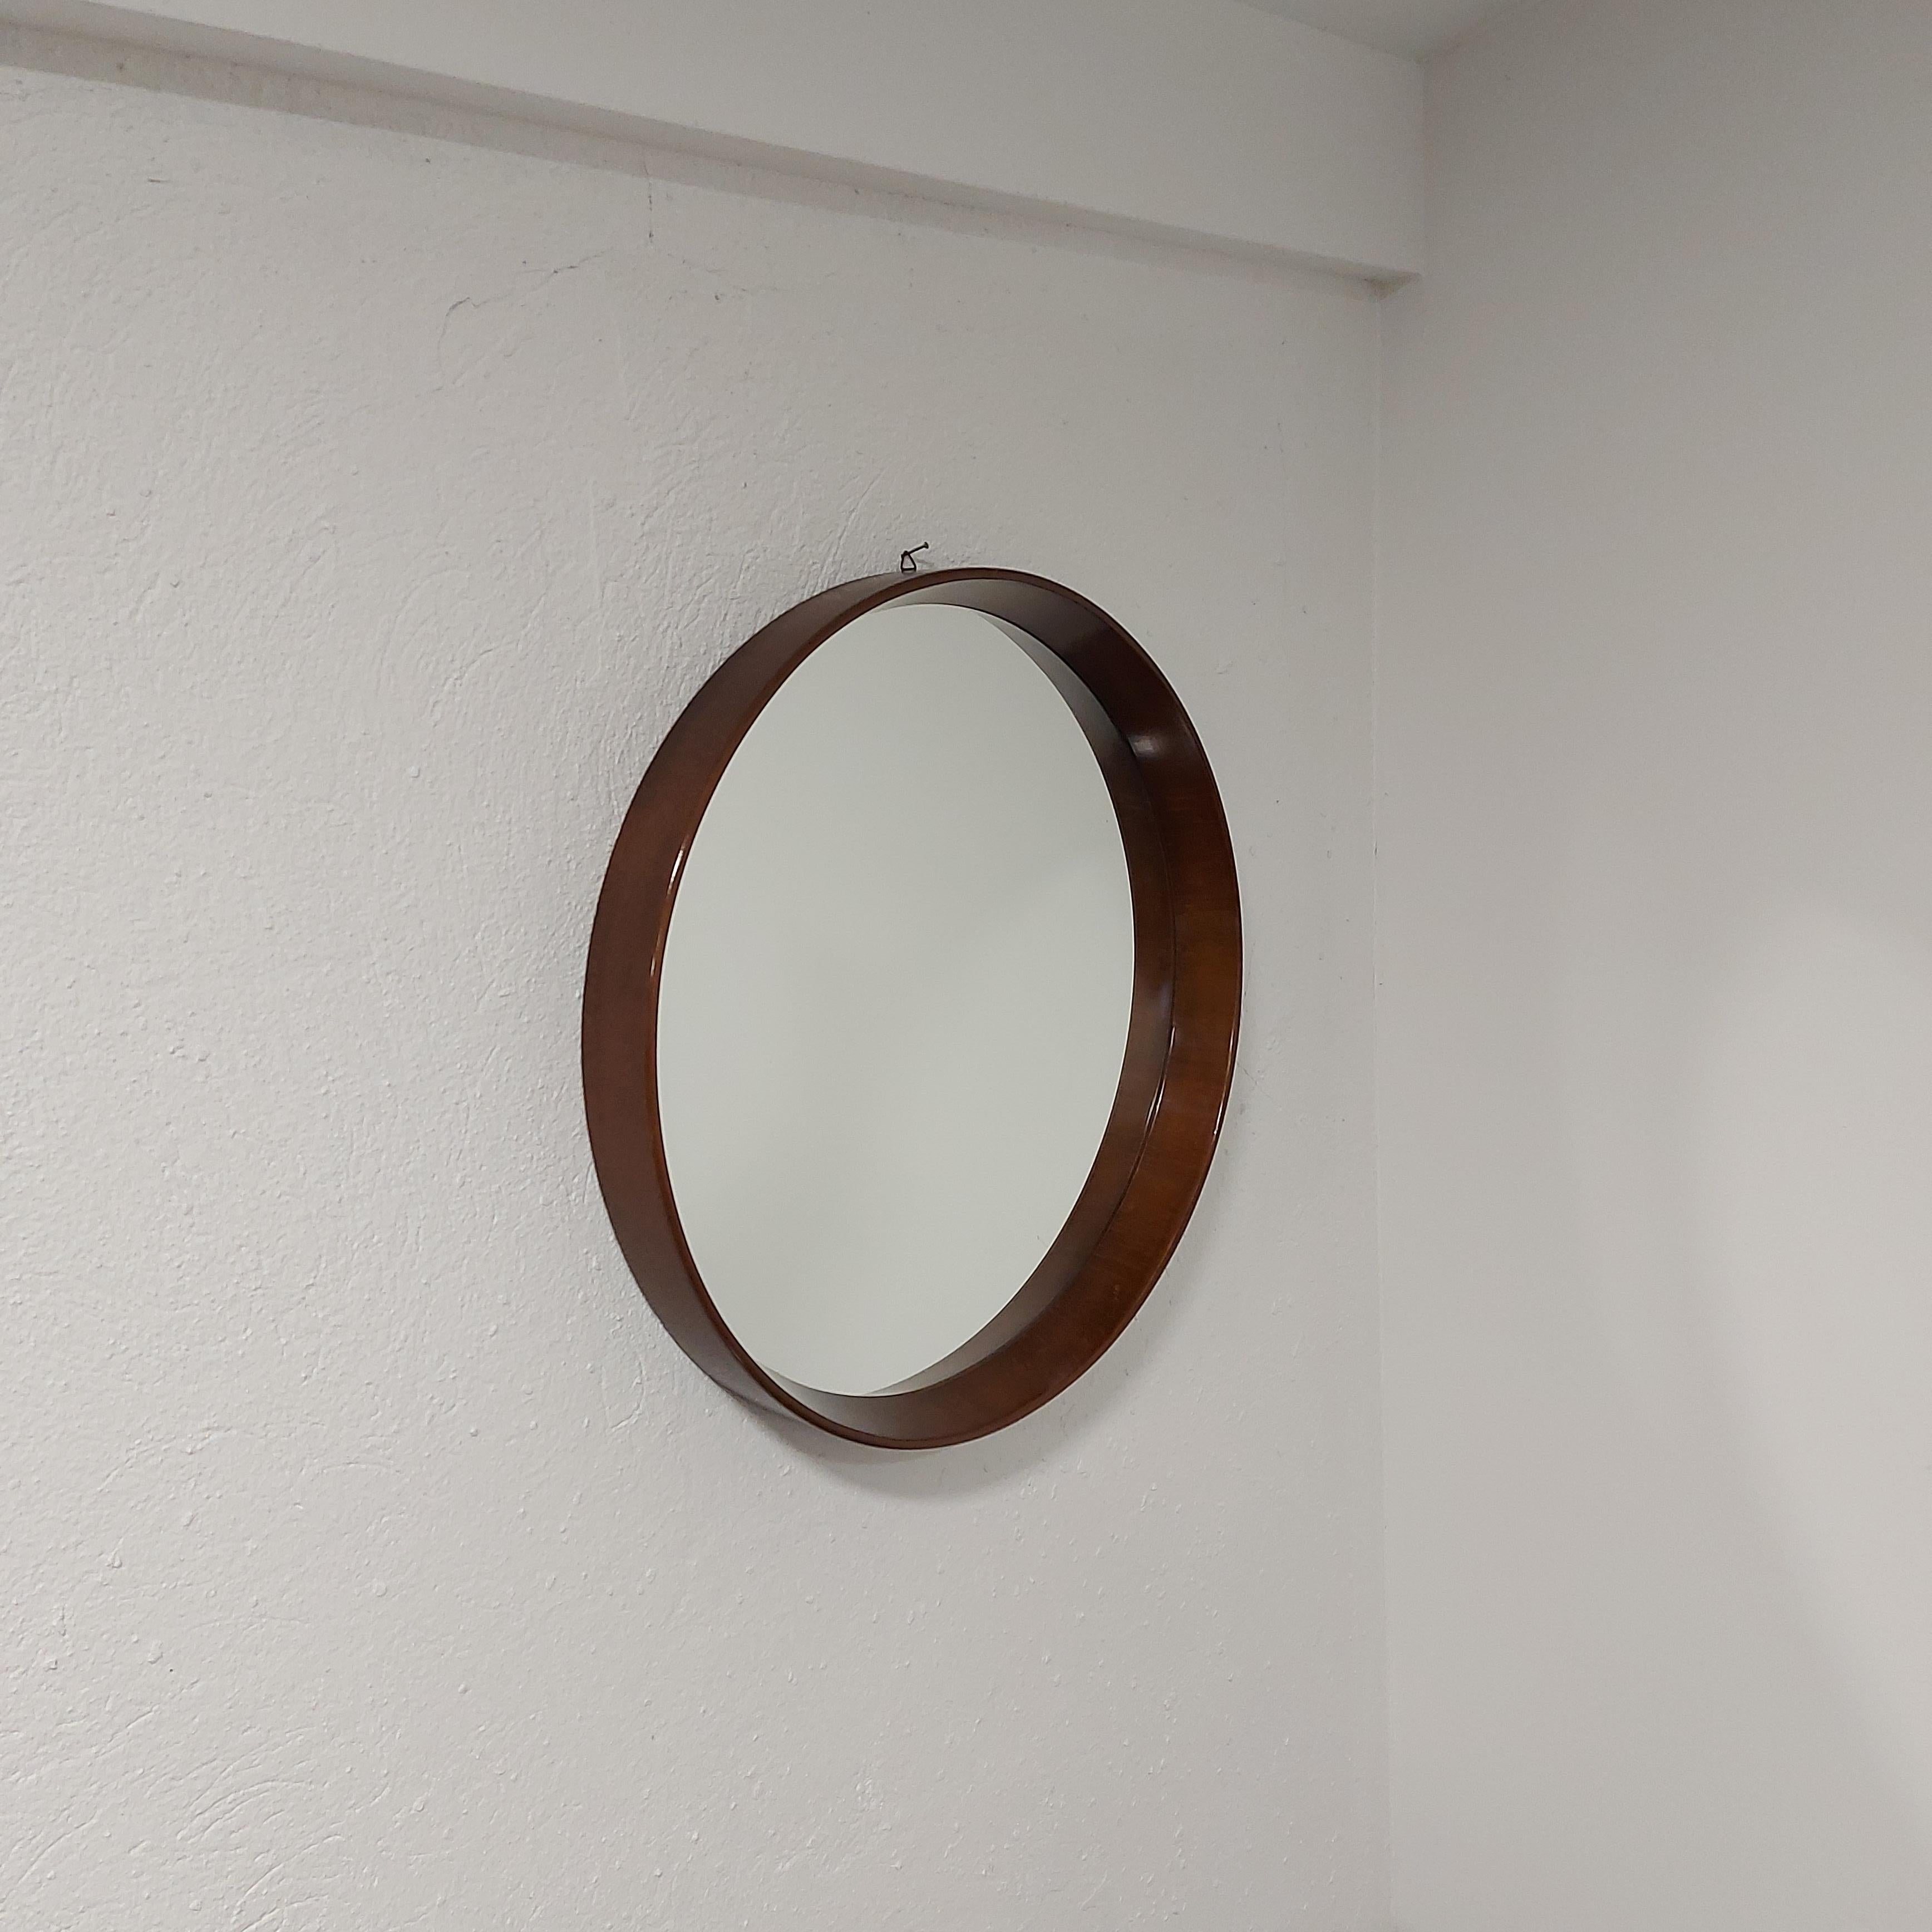 Mirror 1960s

Hardwood frame with beautiful vintage patina.

Production: Italy